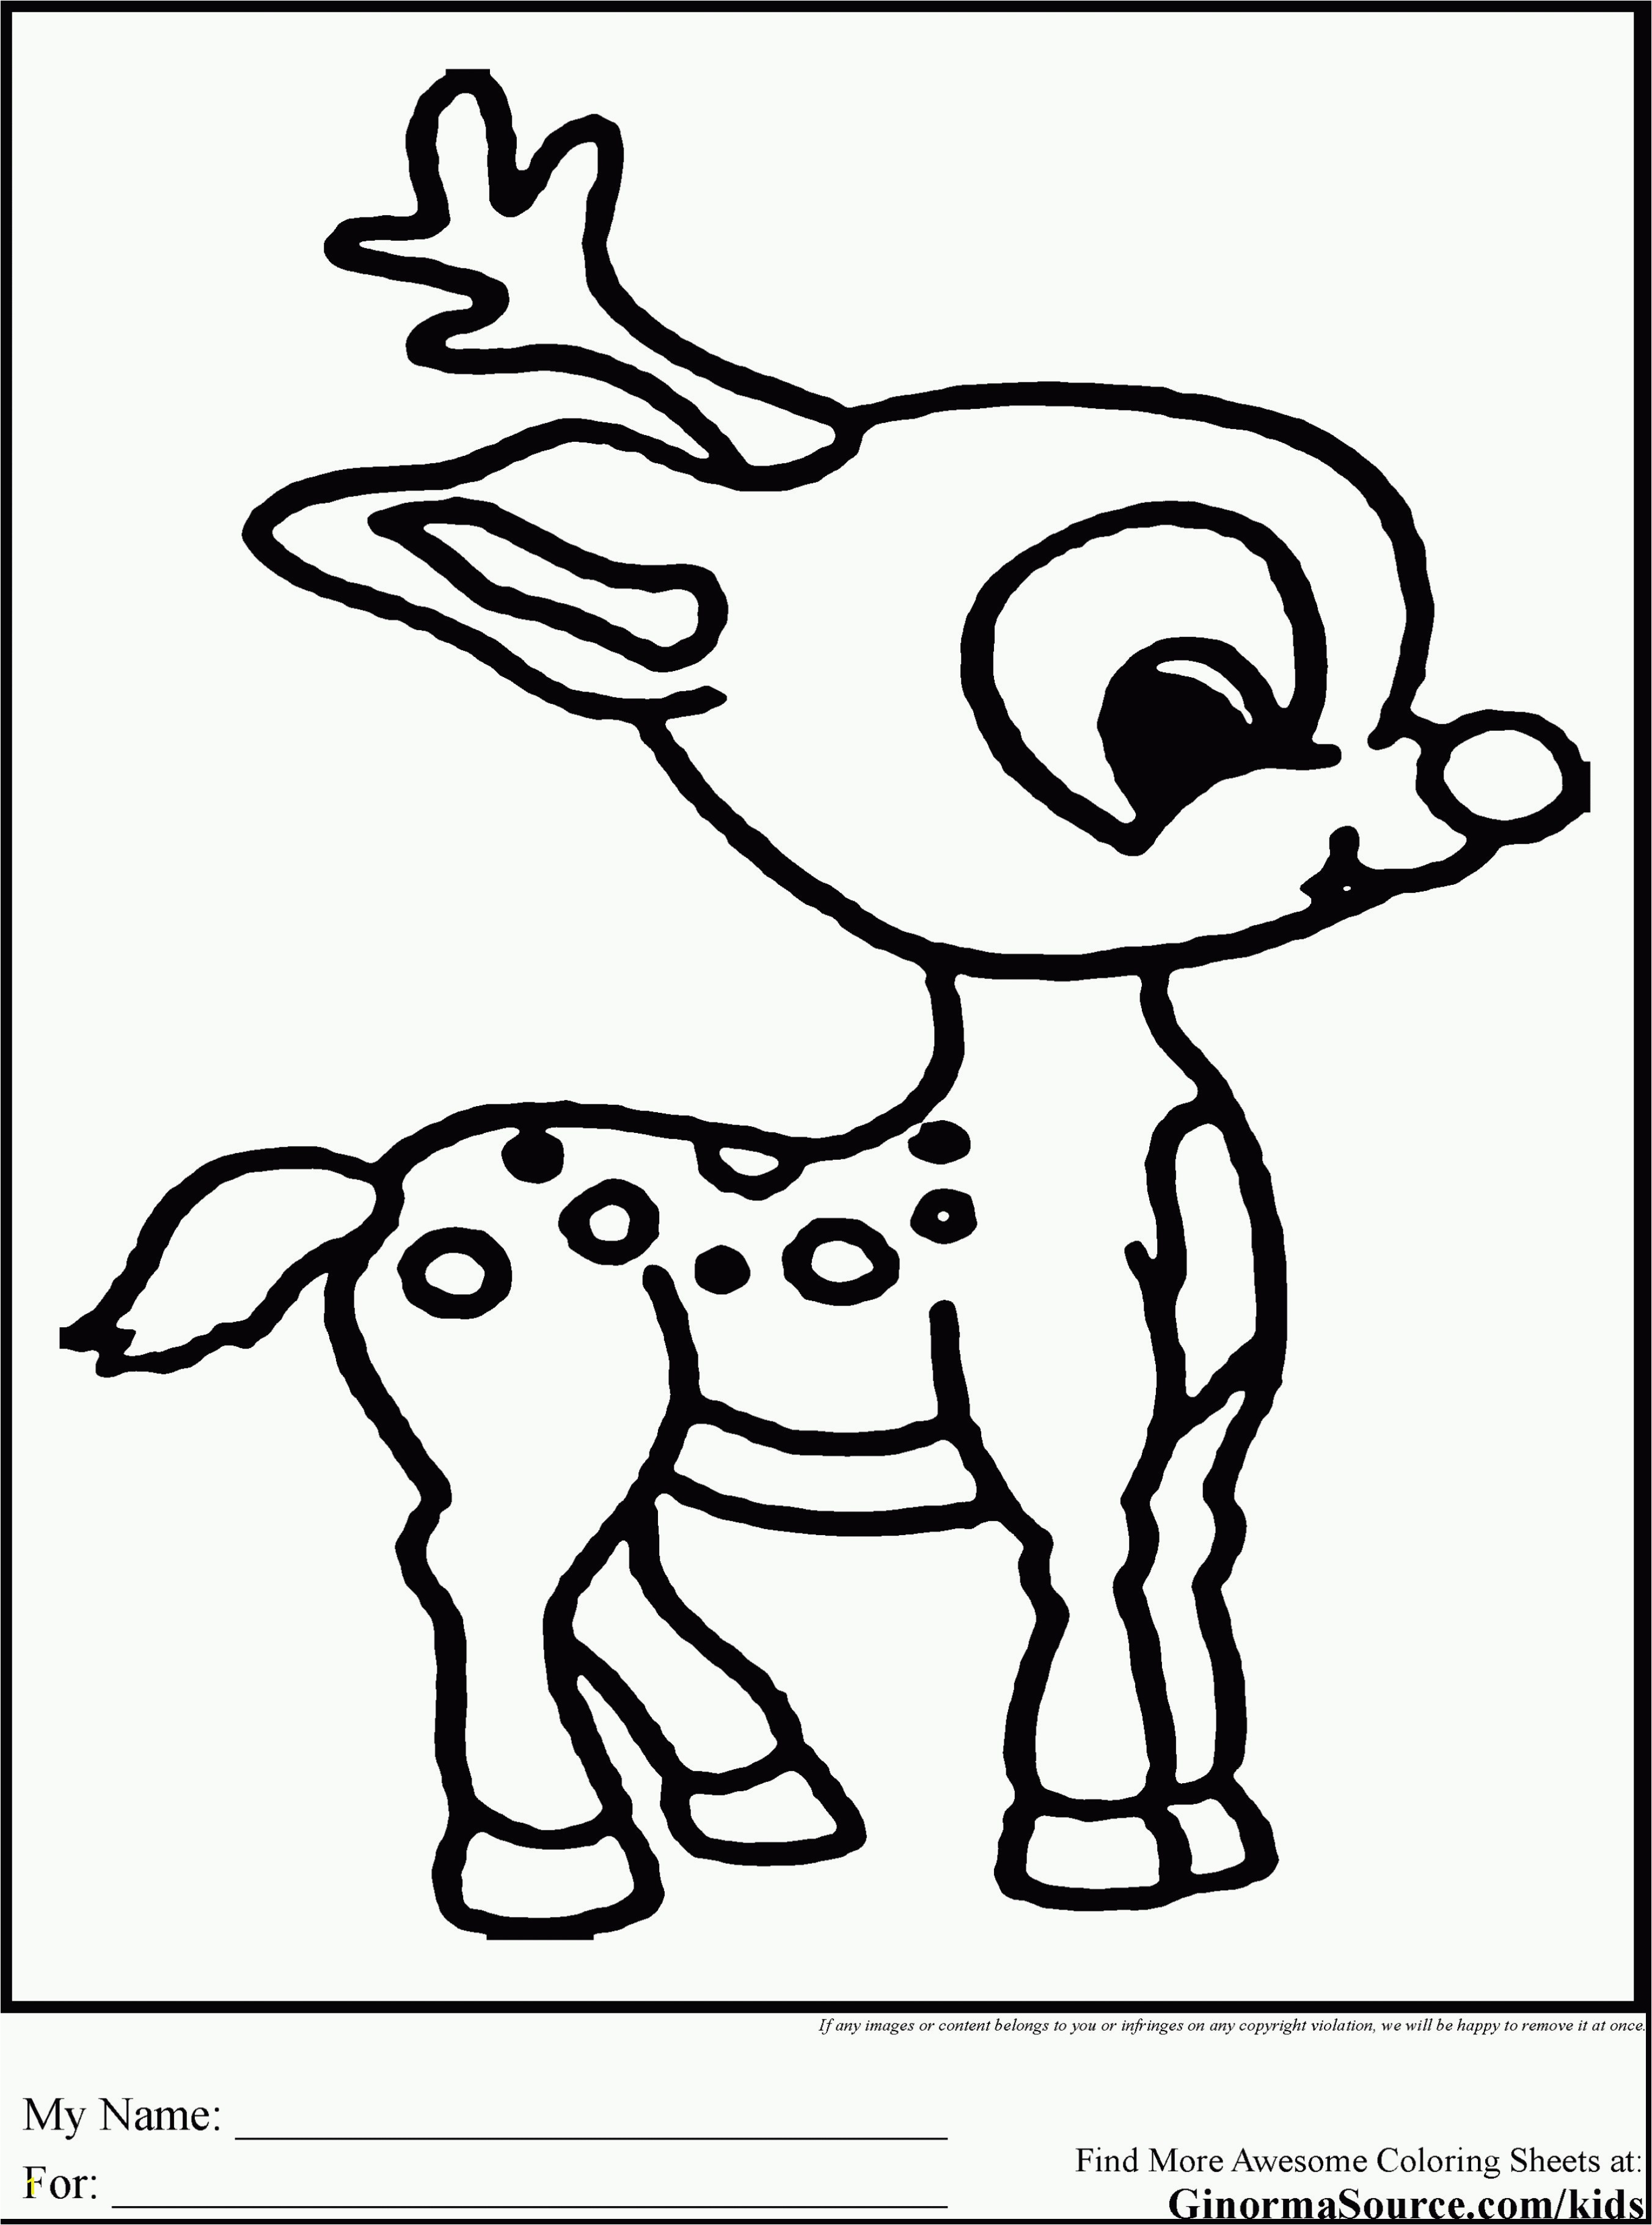 Rudolph the Red Nosed Reindeer Coloring Pages My Coloring Book Info New Rudolph the Red Nosed Reindeer Coloring